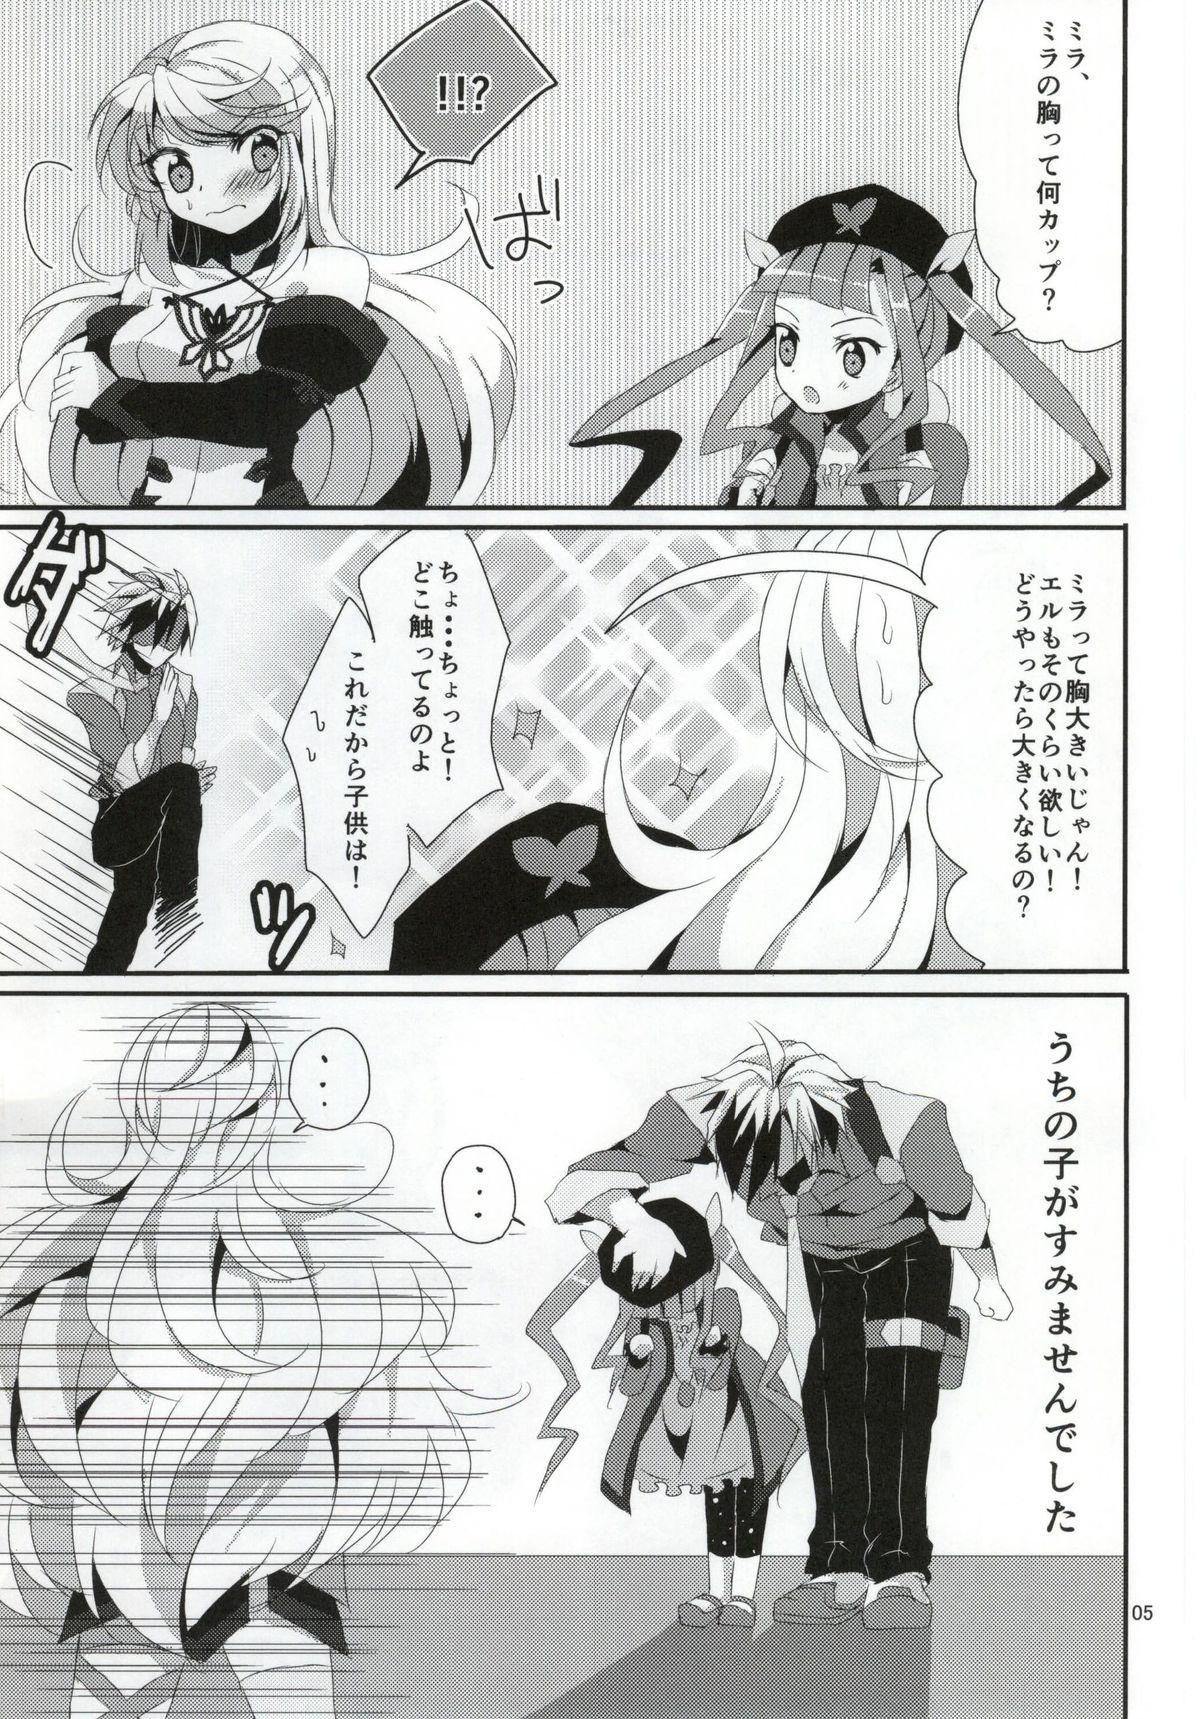 Lover LudMilla Sweet Diary - Tales of xillia Teenage Porn - Page 4